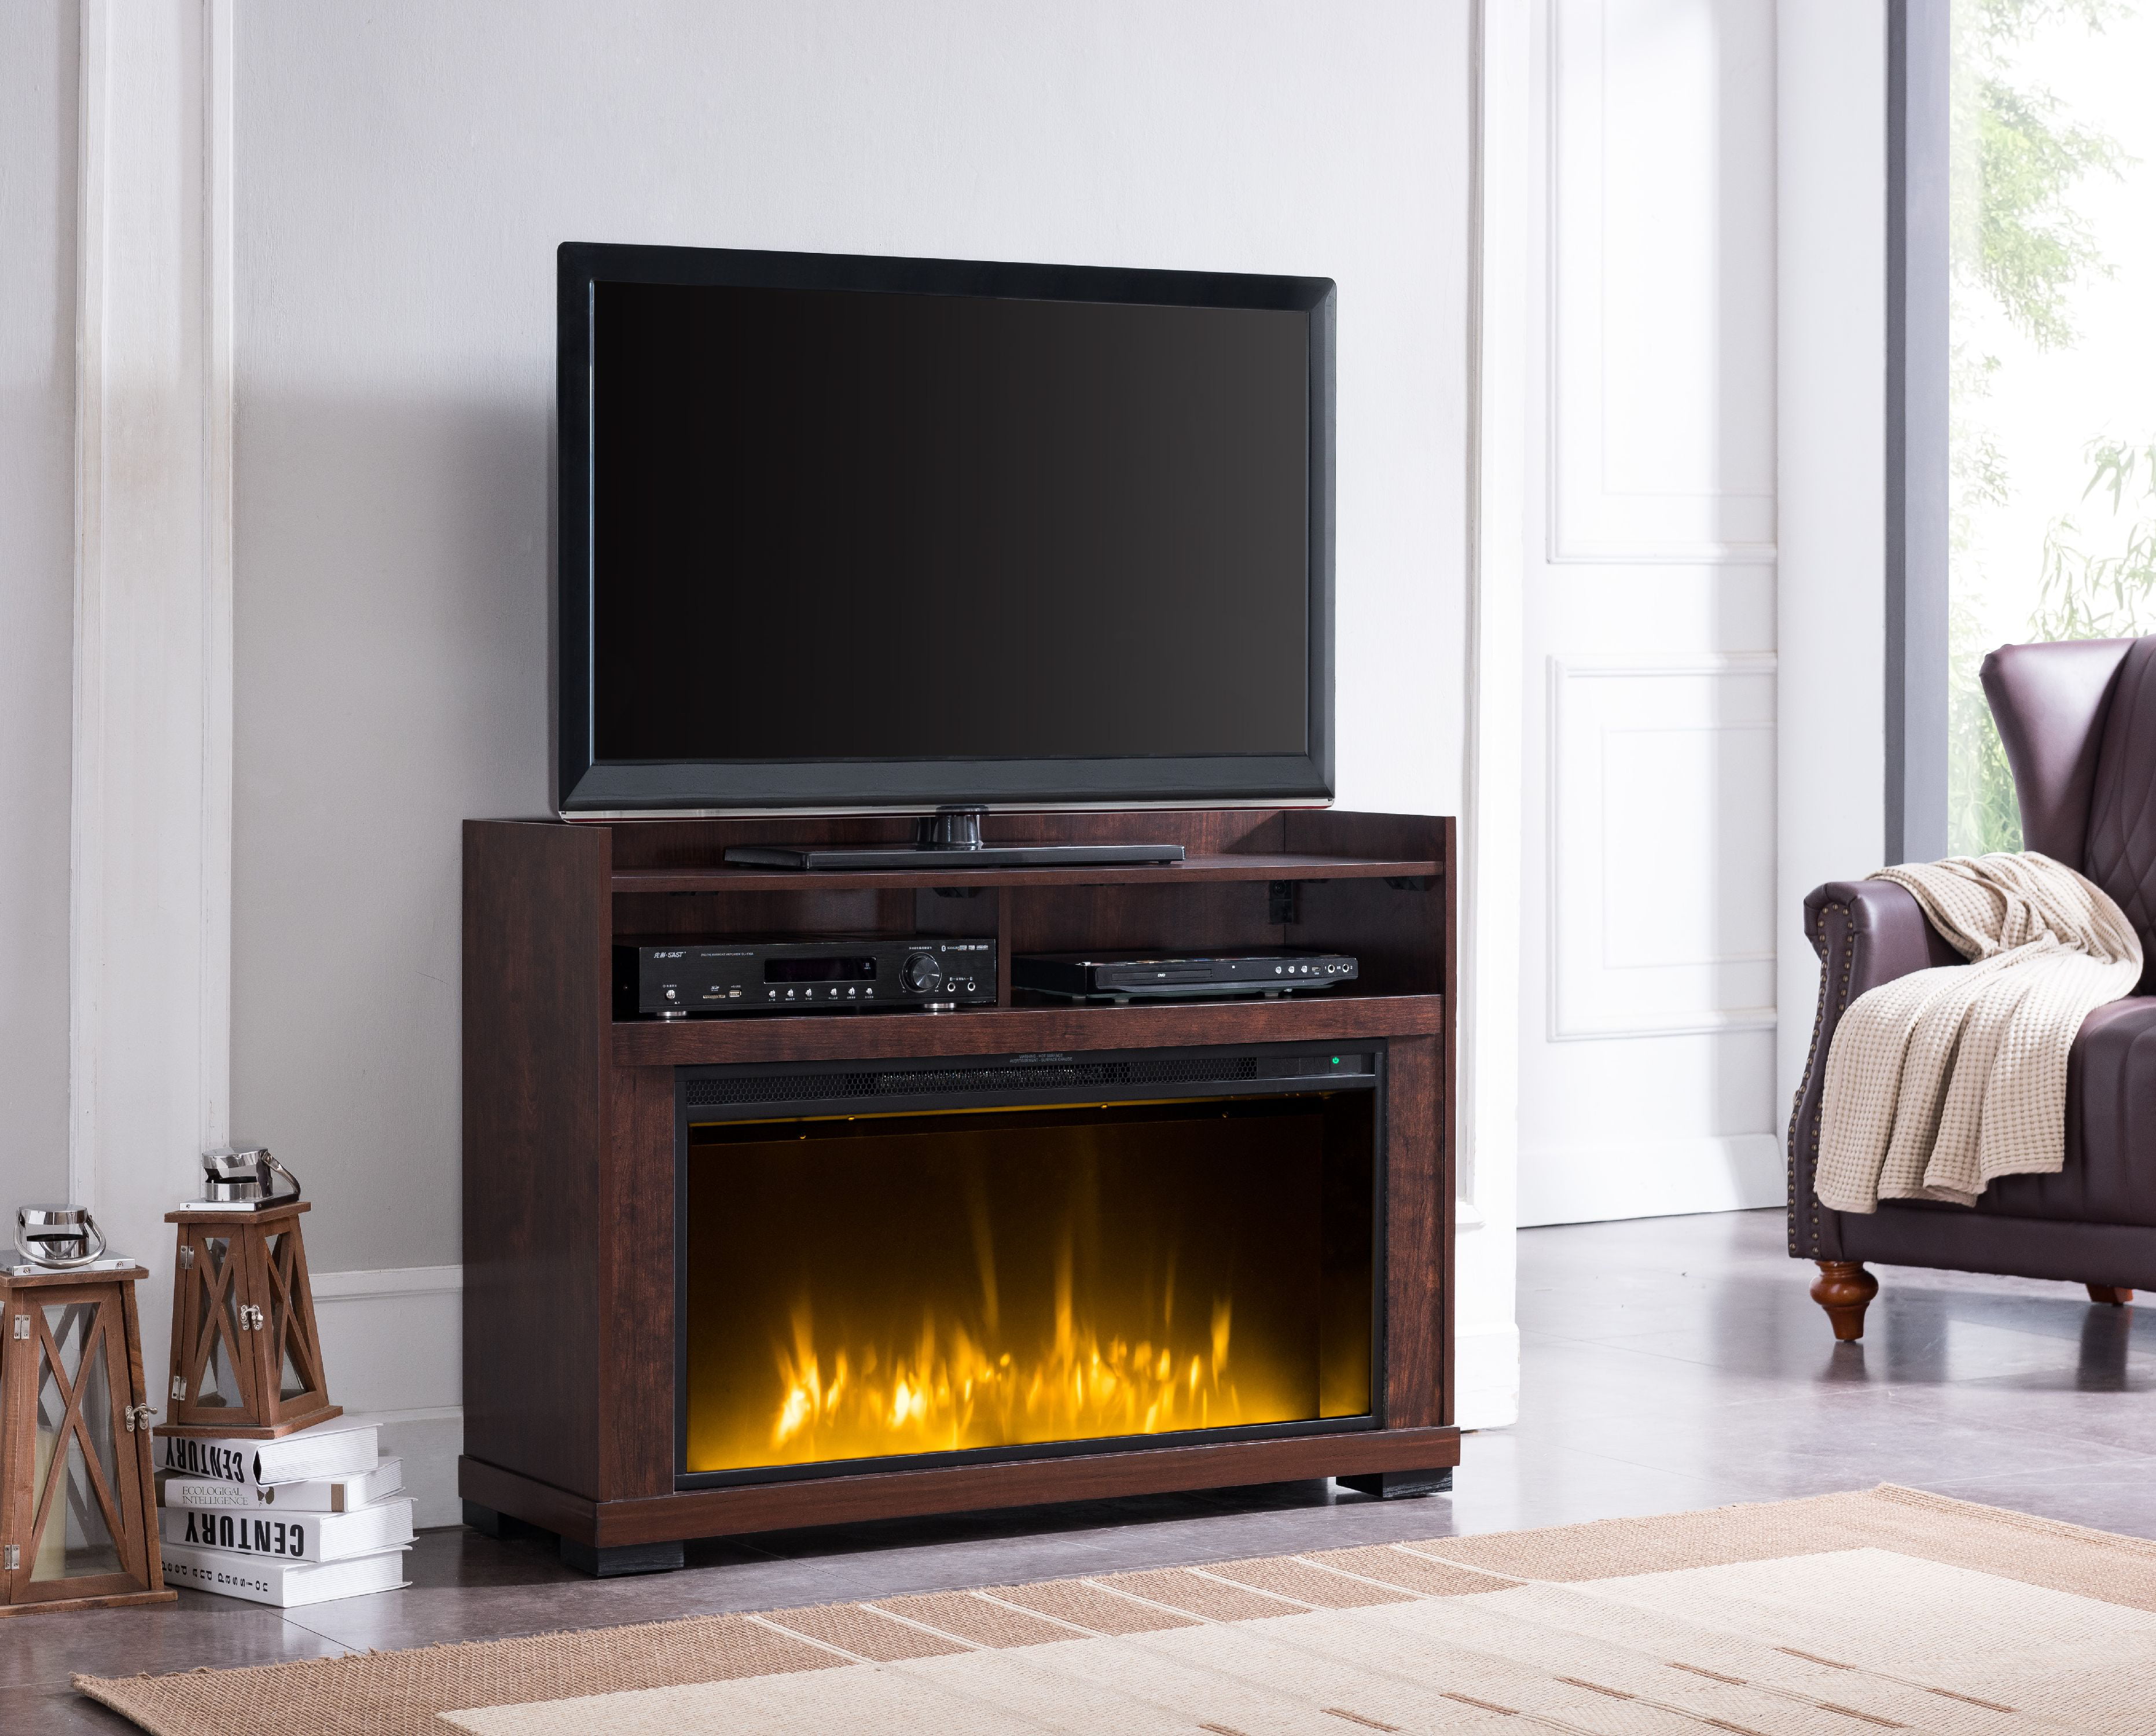 Bold Flame Hampton Large View Fireplace, Schuyler Tv Stand For Tvs Up 60 With Electric Fireplace